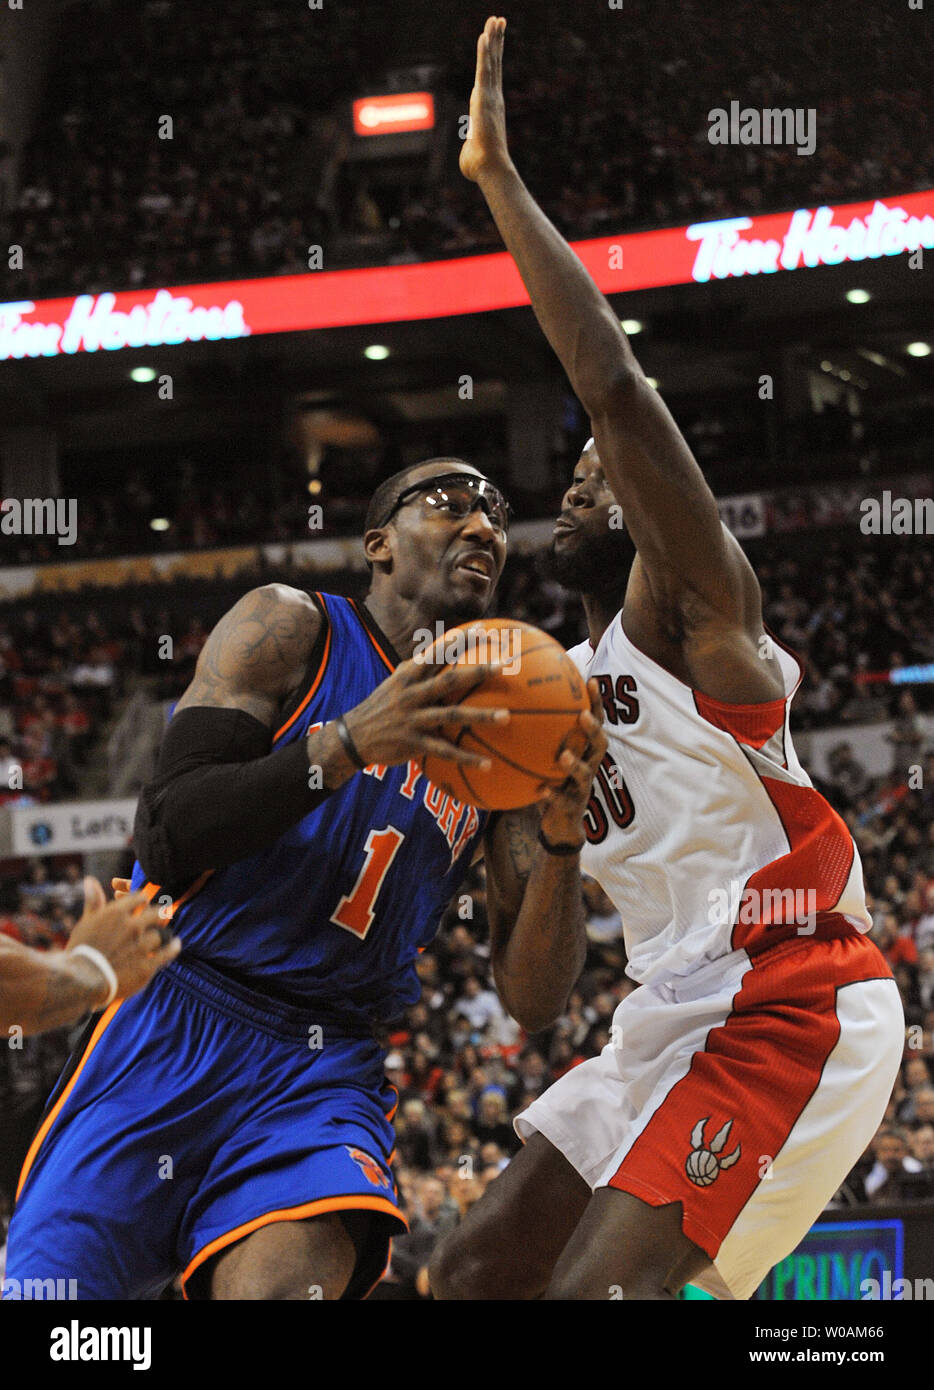 New York Knicks' Amar'e Stoudemire (L) drives into the key past  Toronto Raptors' Reggie Evans in second quarter action of the Raptors' home opener at the Air Canada Center in Toronto, Canada on October 27, 2010. The Knicks defeated the Raptors 98-93.   UPI /Christine Chew Stock Photo